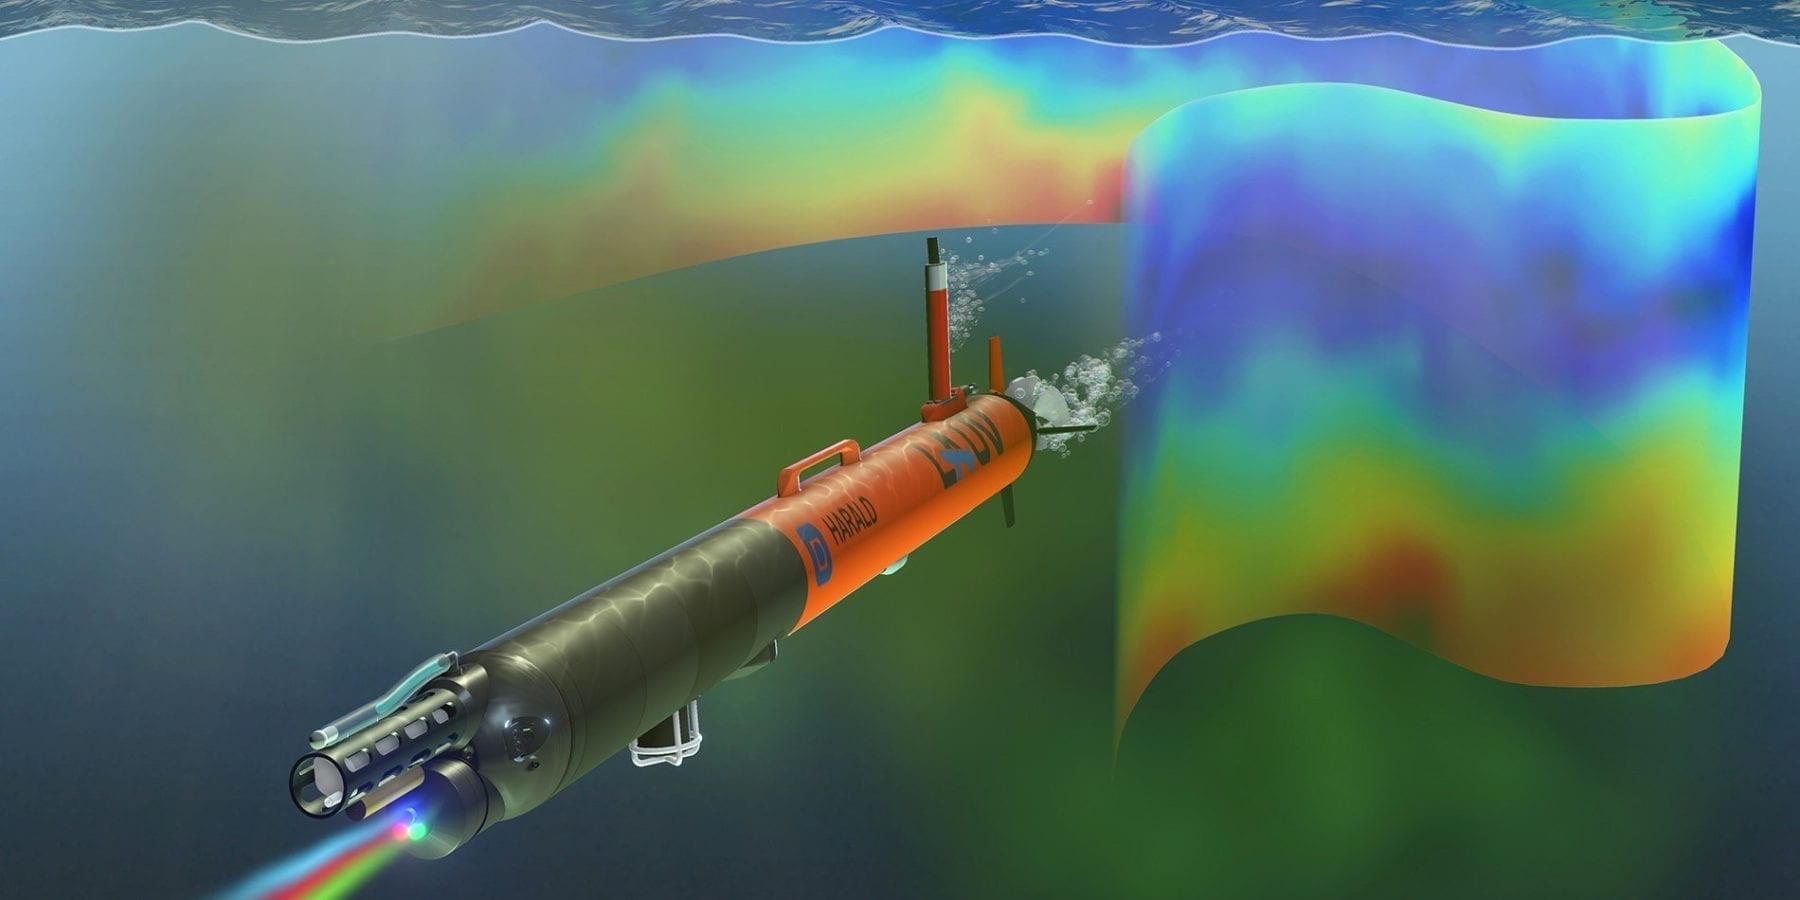 A smart AUV maps phytoplankton to help seabird populations